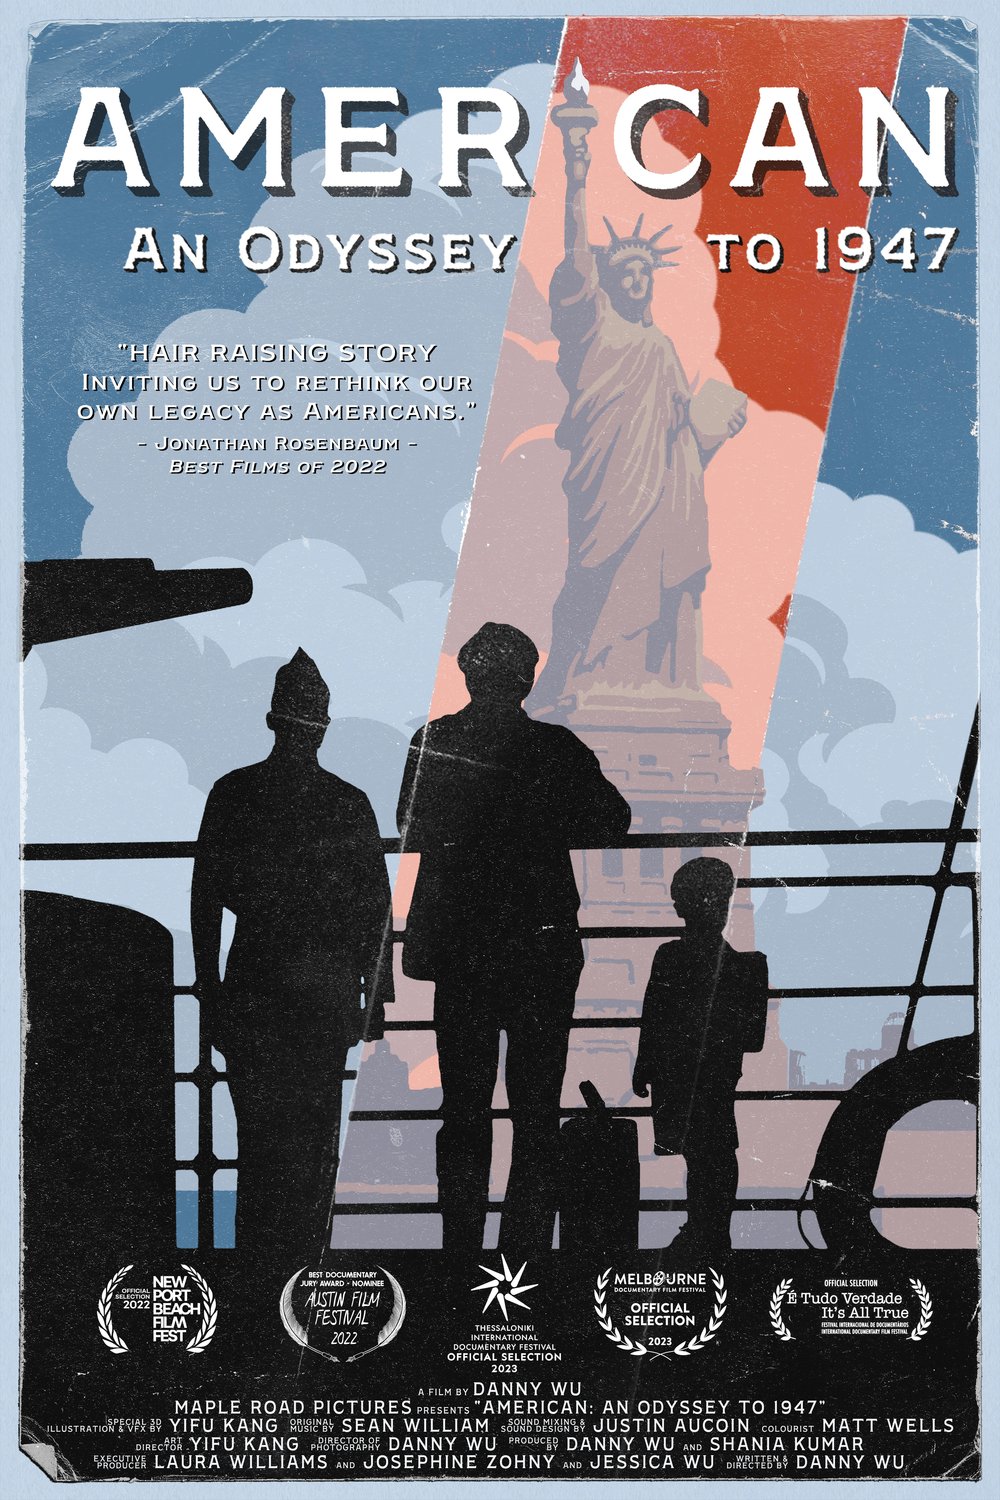 Poster of the movie American: An Odyssey to 1947